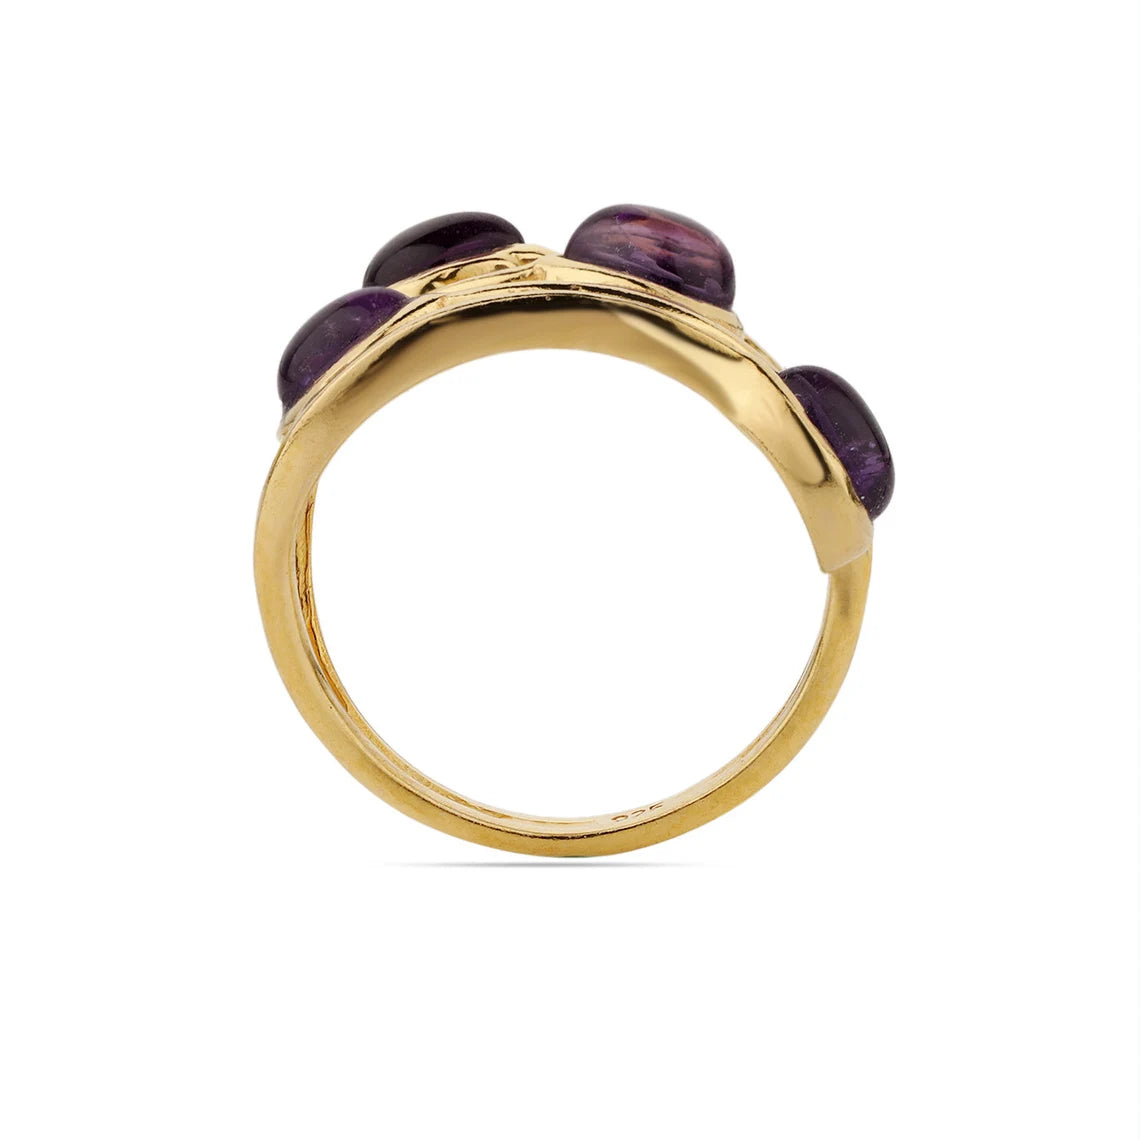 Carnelian - Amethyst - 925 Sterling Silver Gold Plated Ring